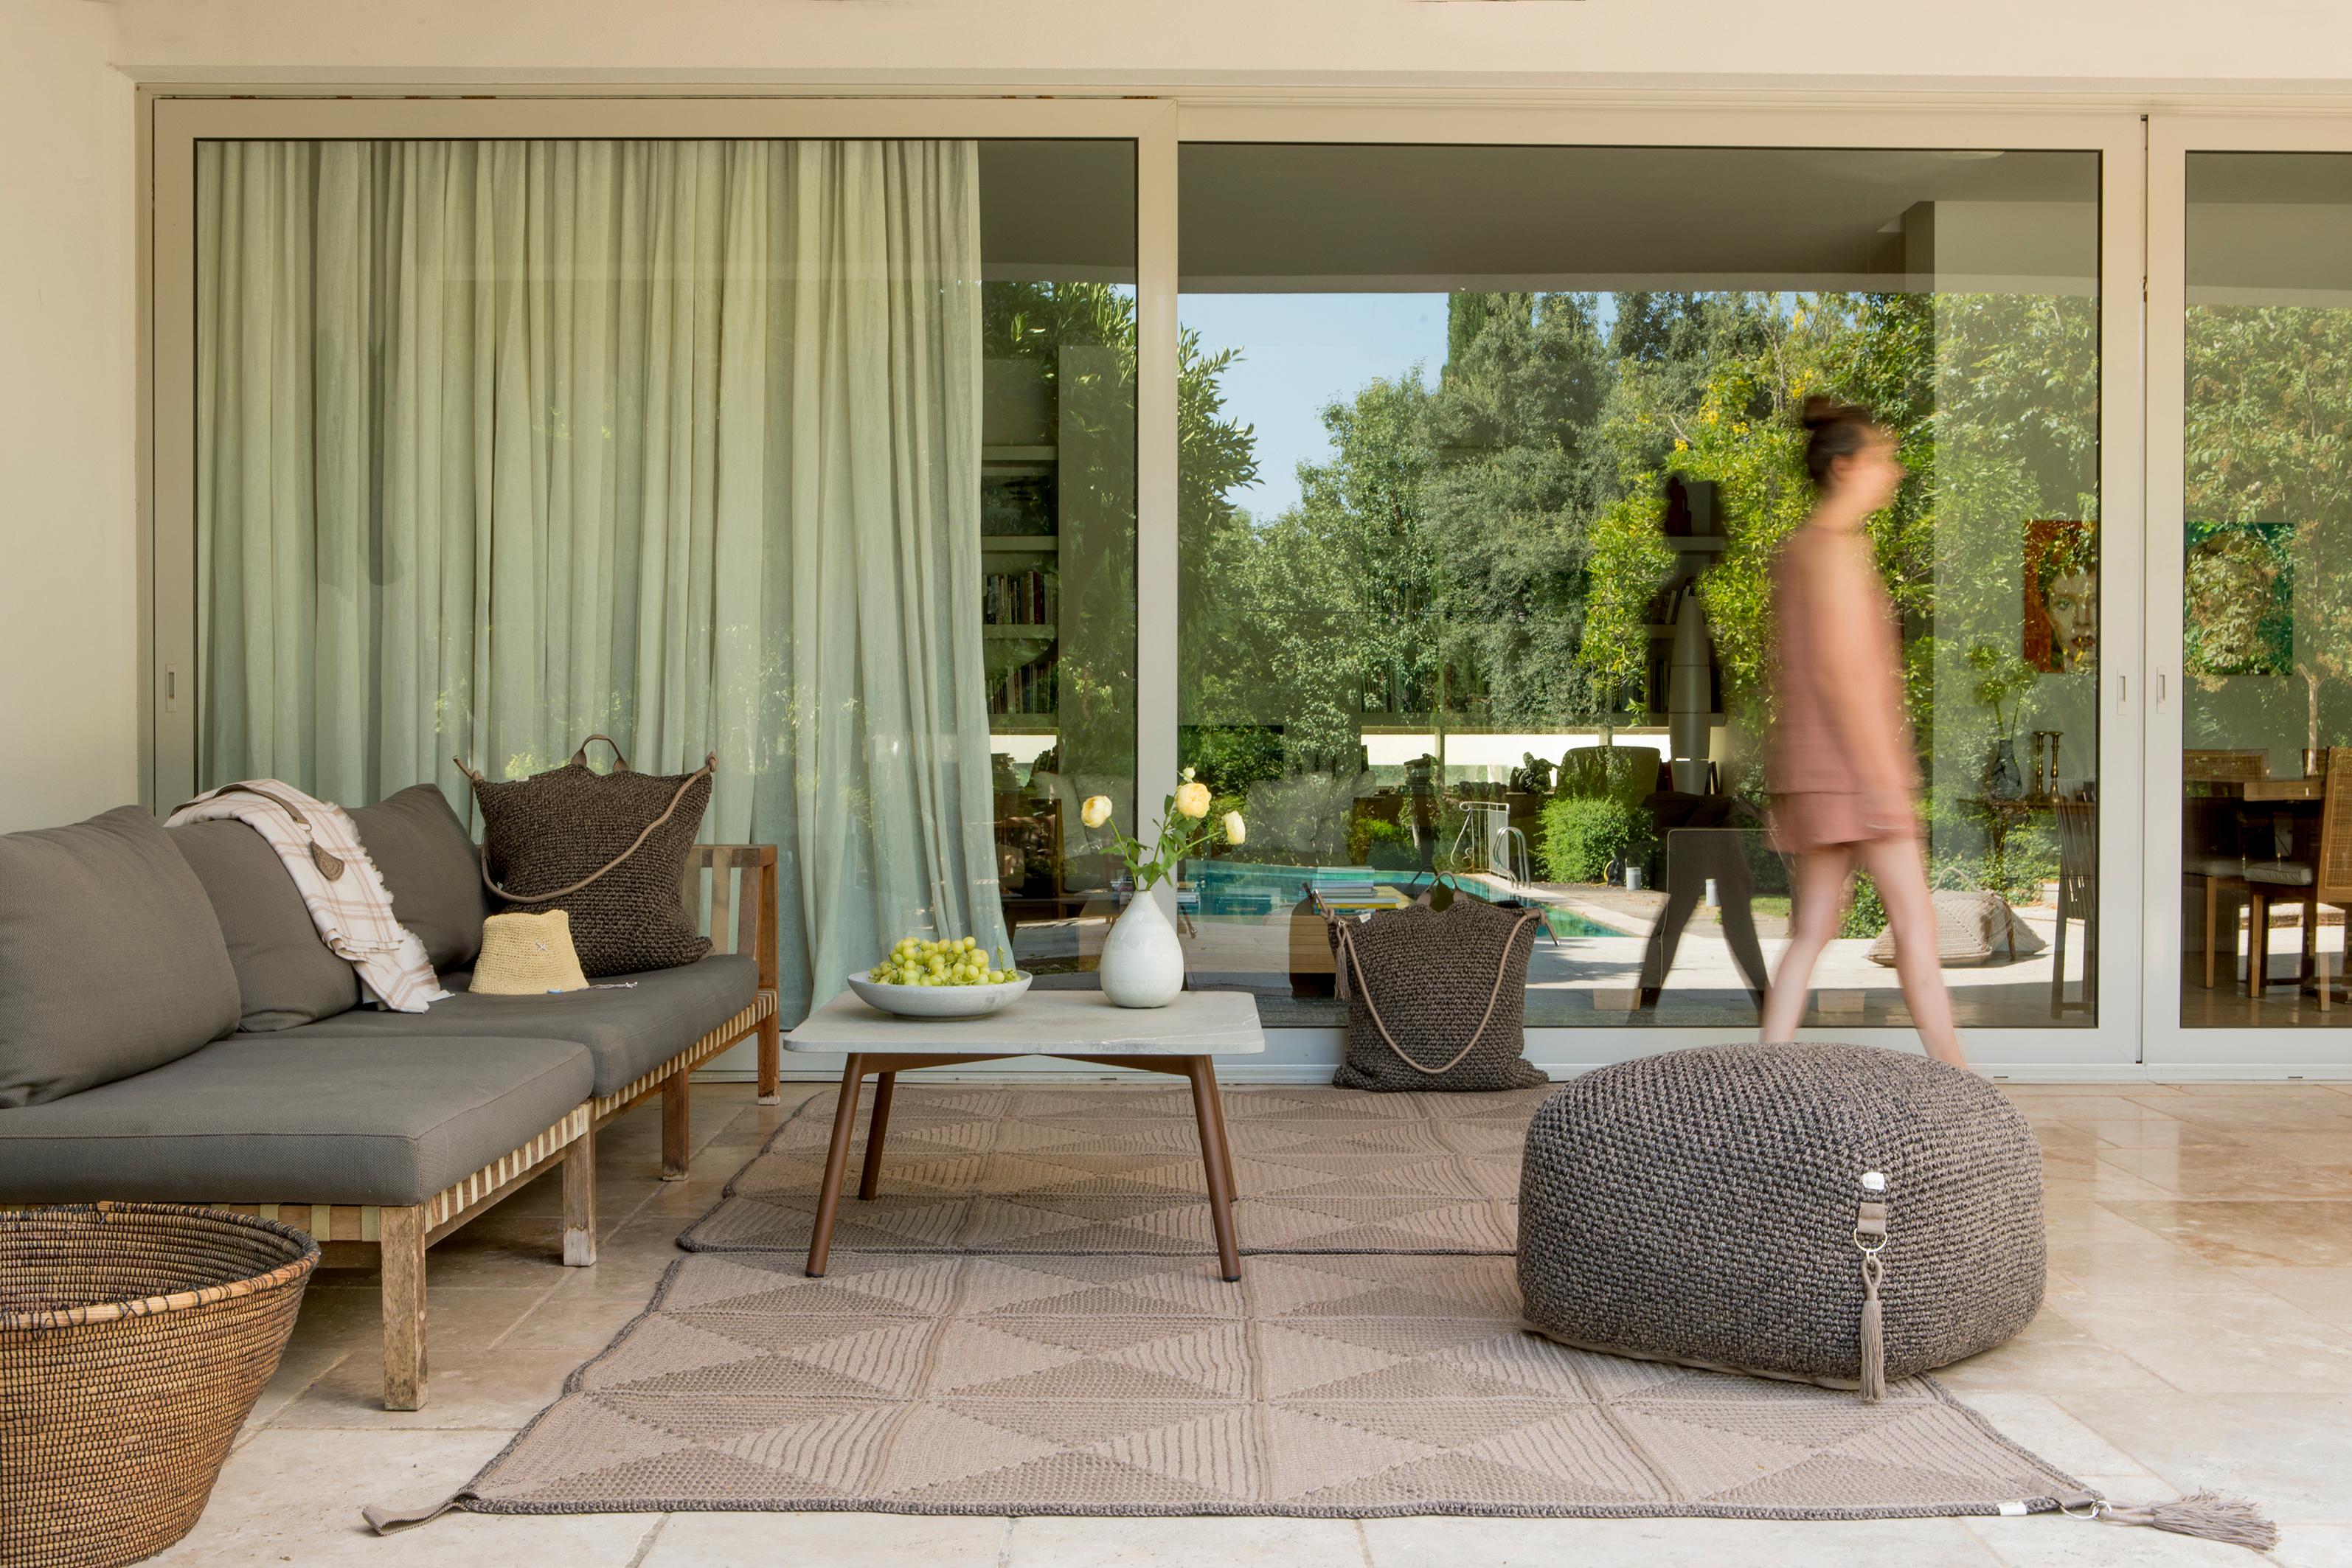 The Classic crochet granny square takes a contemporary twist in this outdoor rug. Large squares form the rug, framed with bespoke webbing. Handmade from UV protected bespoke iota yarn in earth tones, the textile is soft, yet durable and suitable for